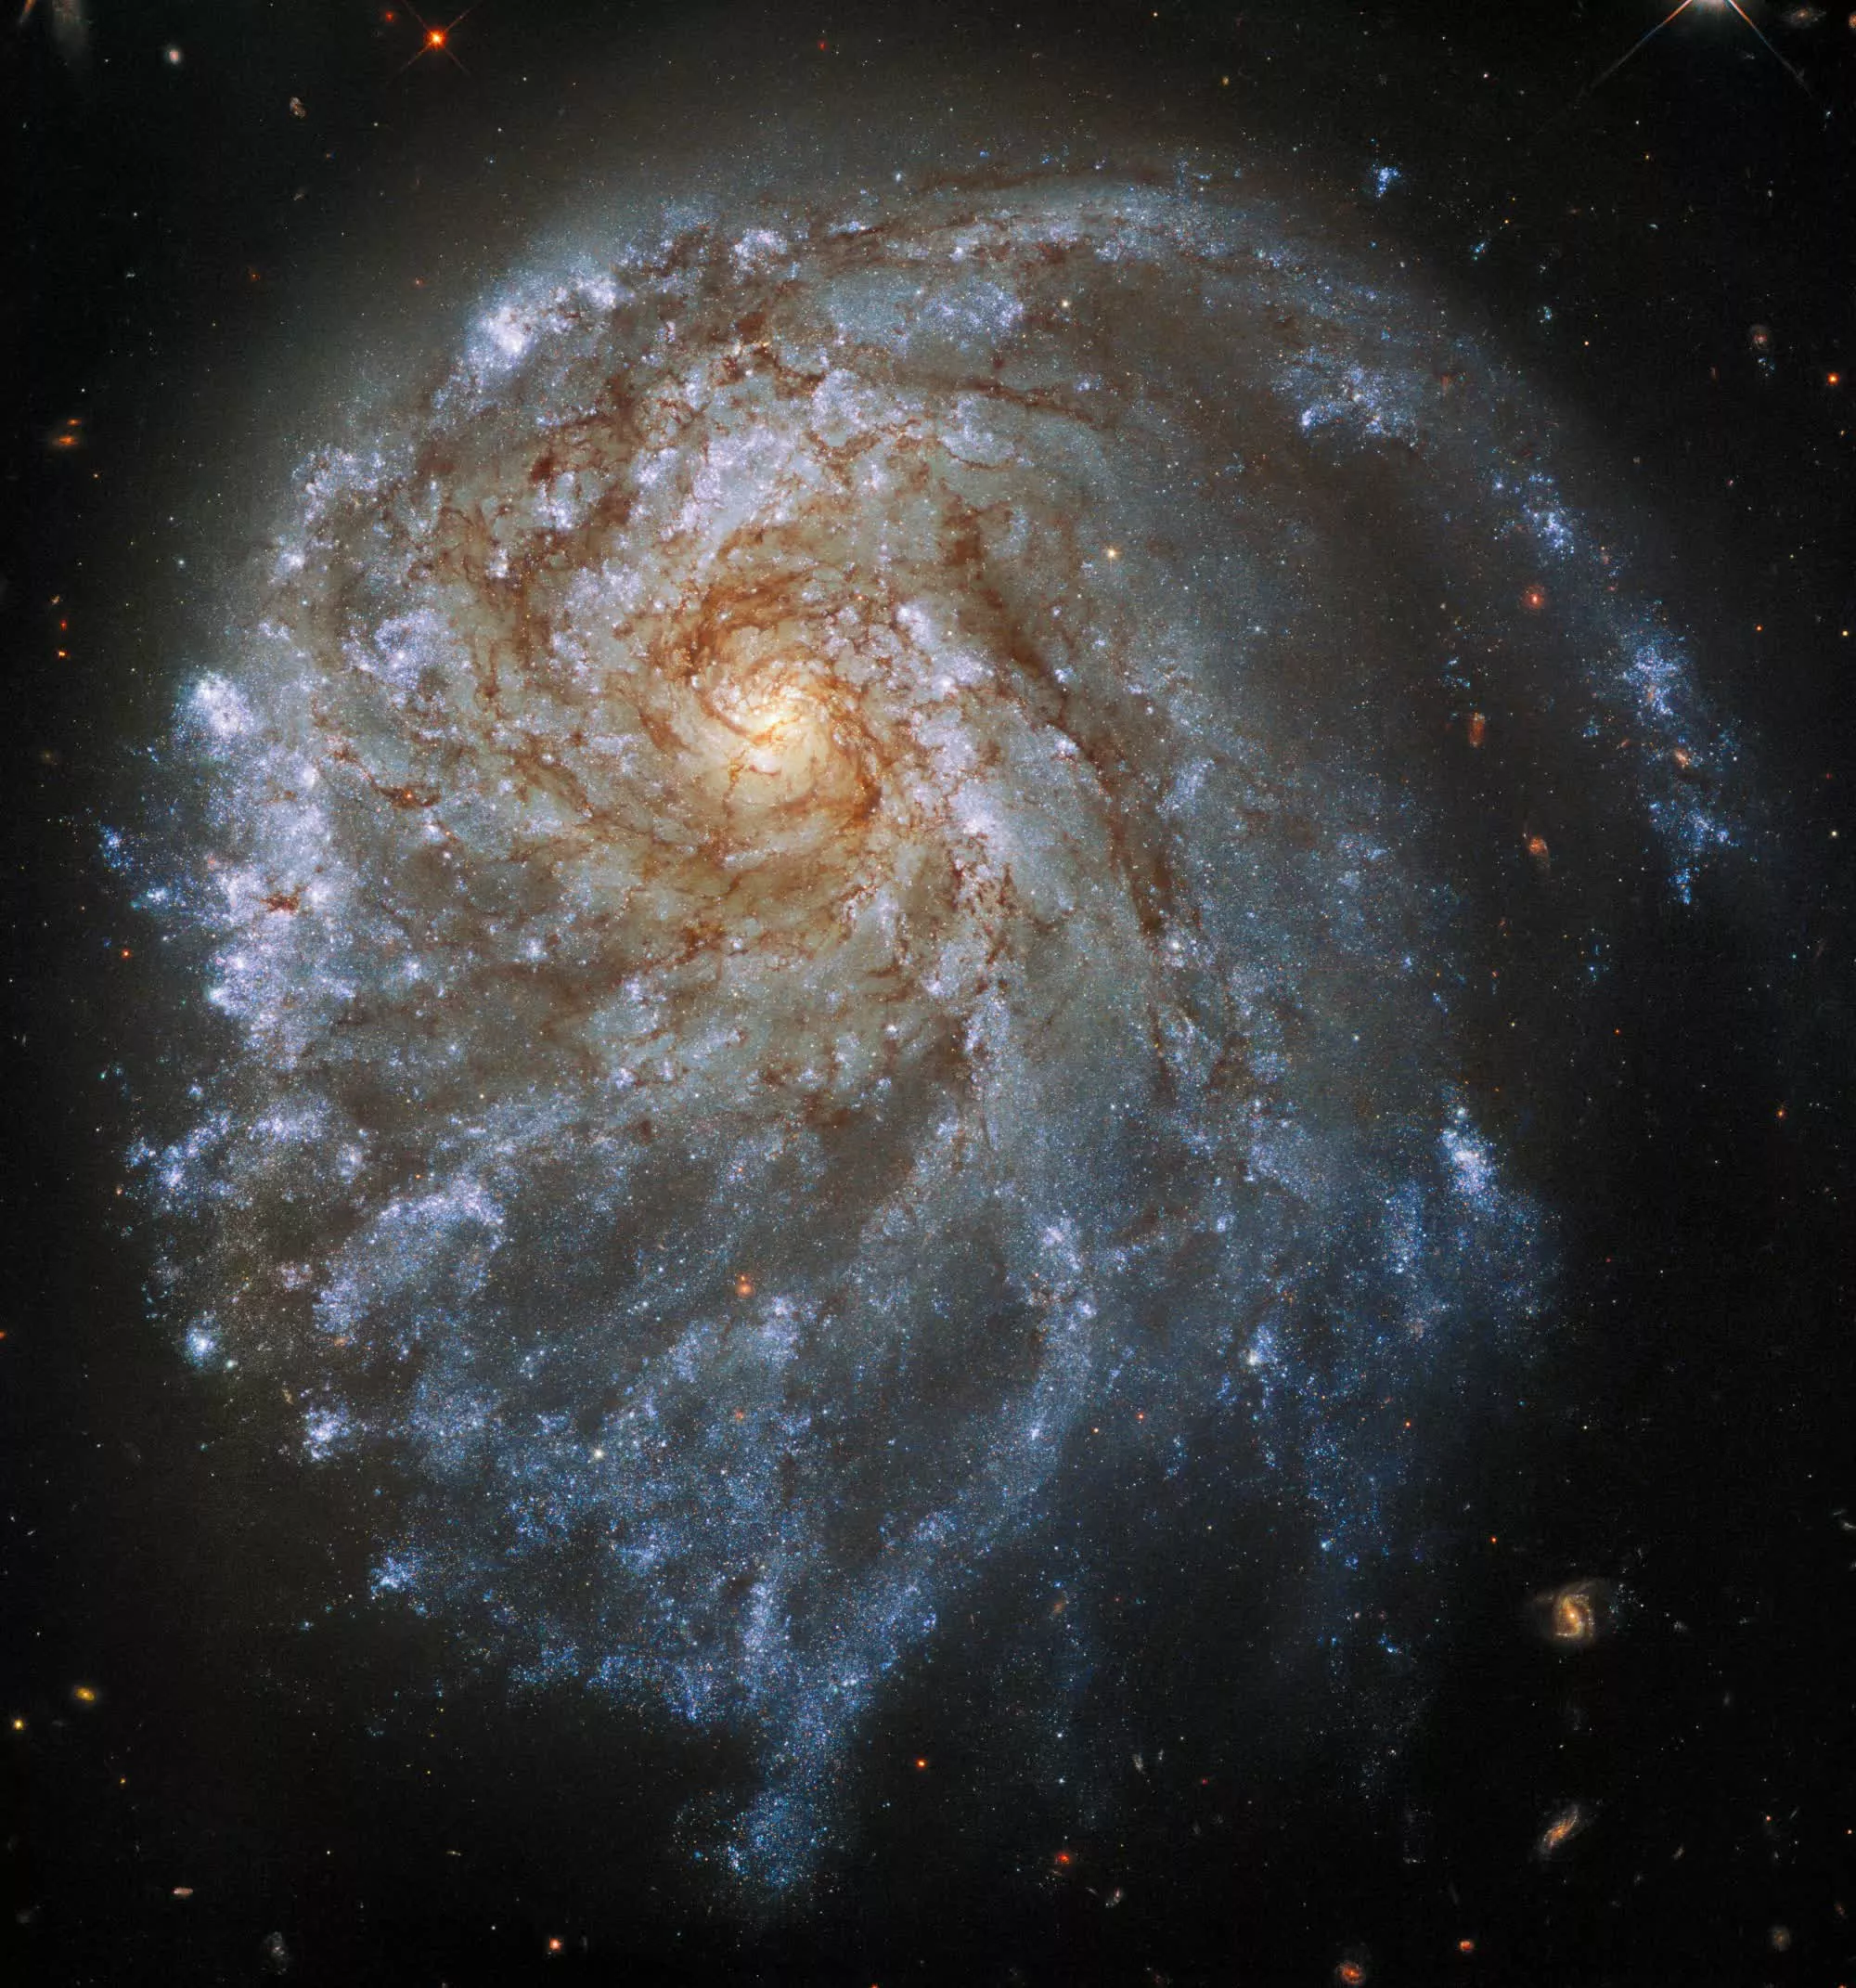 The Hubble Space Telescope takes a closer look at an unusual spiral galaxy 120 million light-years away